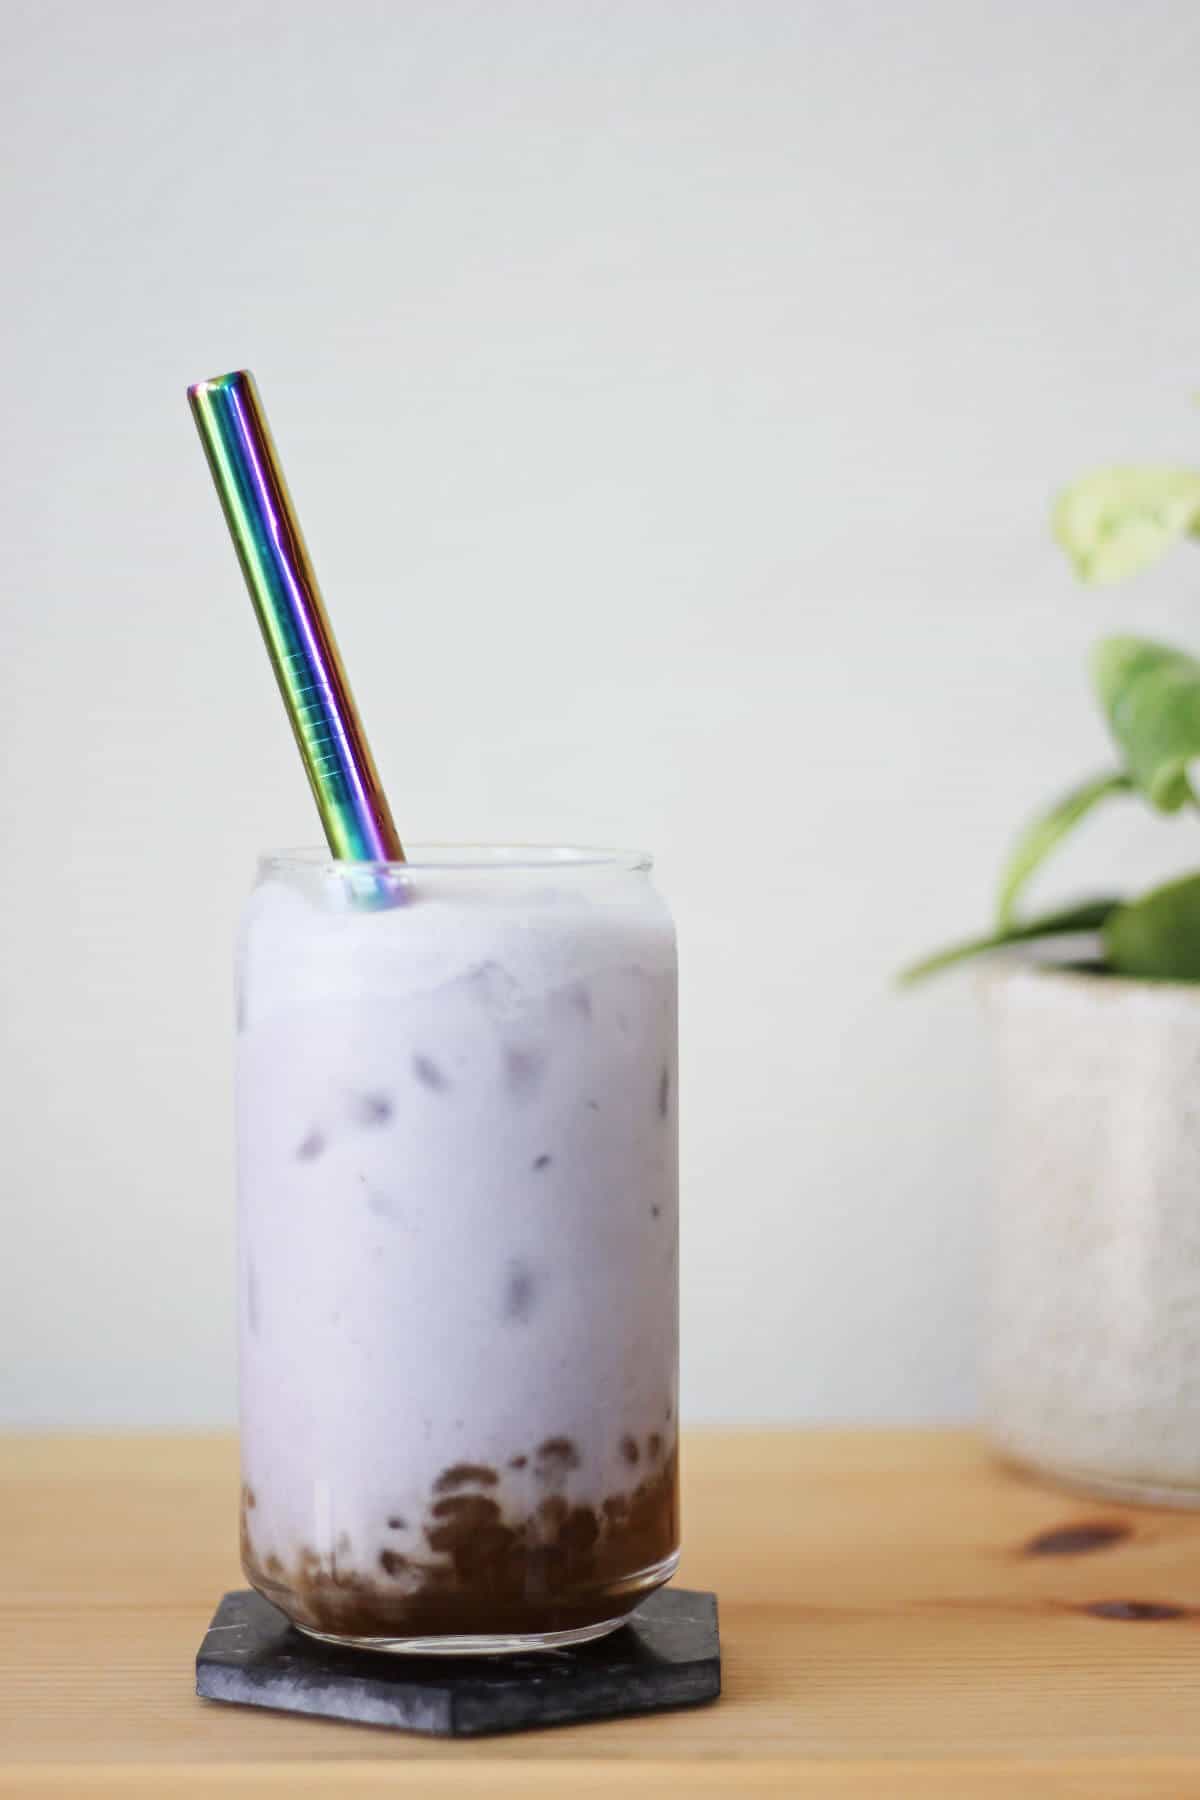 Clear glass filled with brown sugar boba, lilac milk tea, ice and a metal straw.